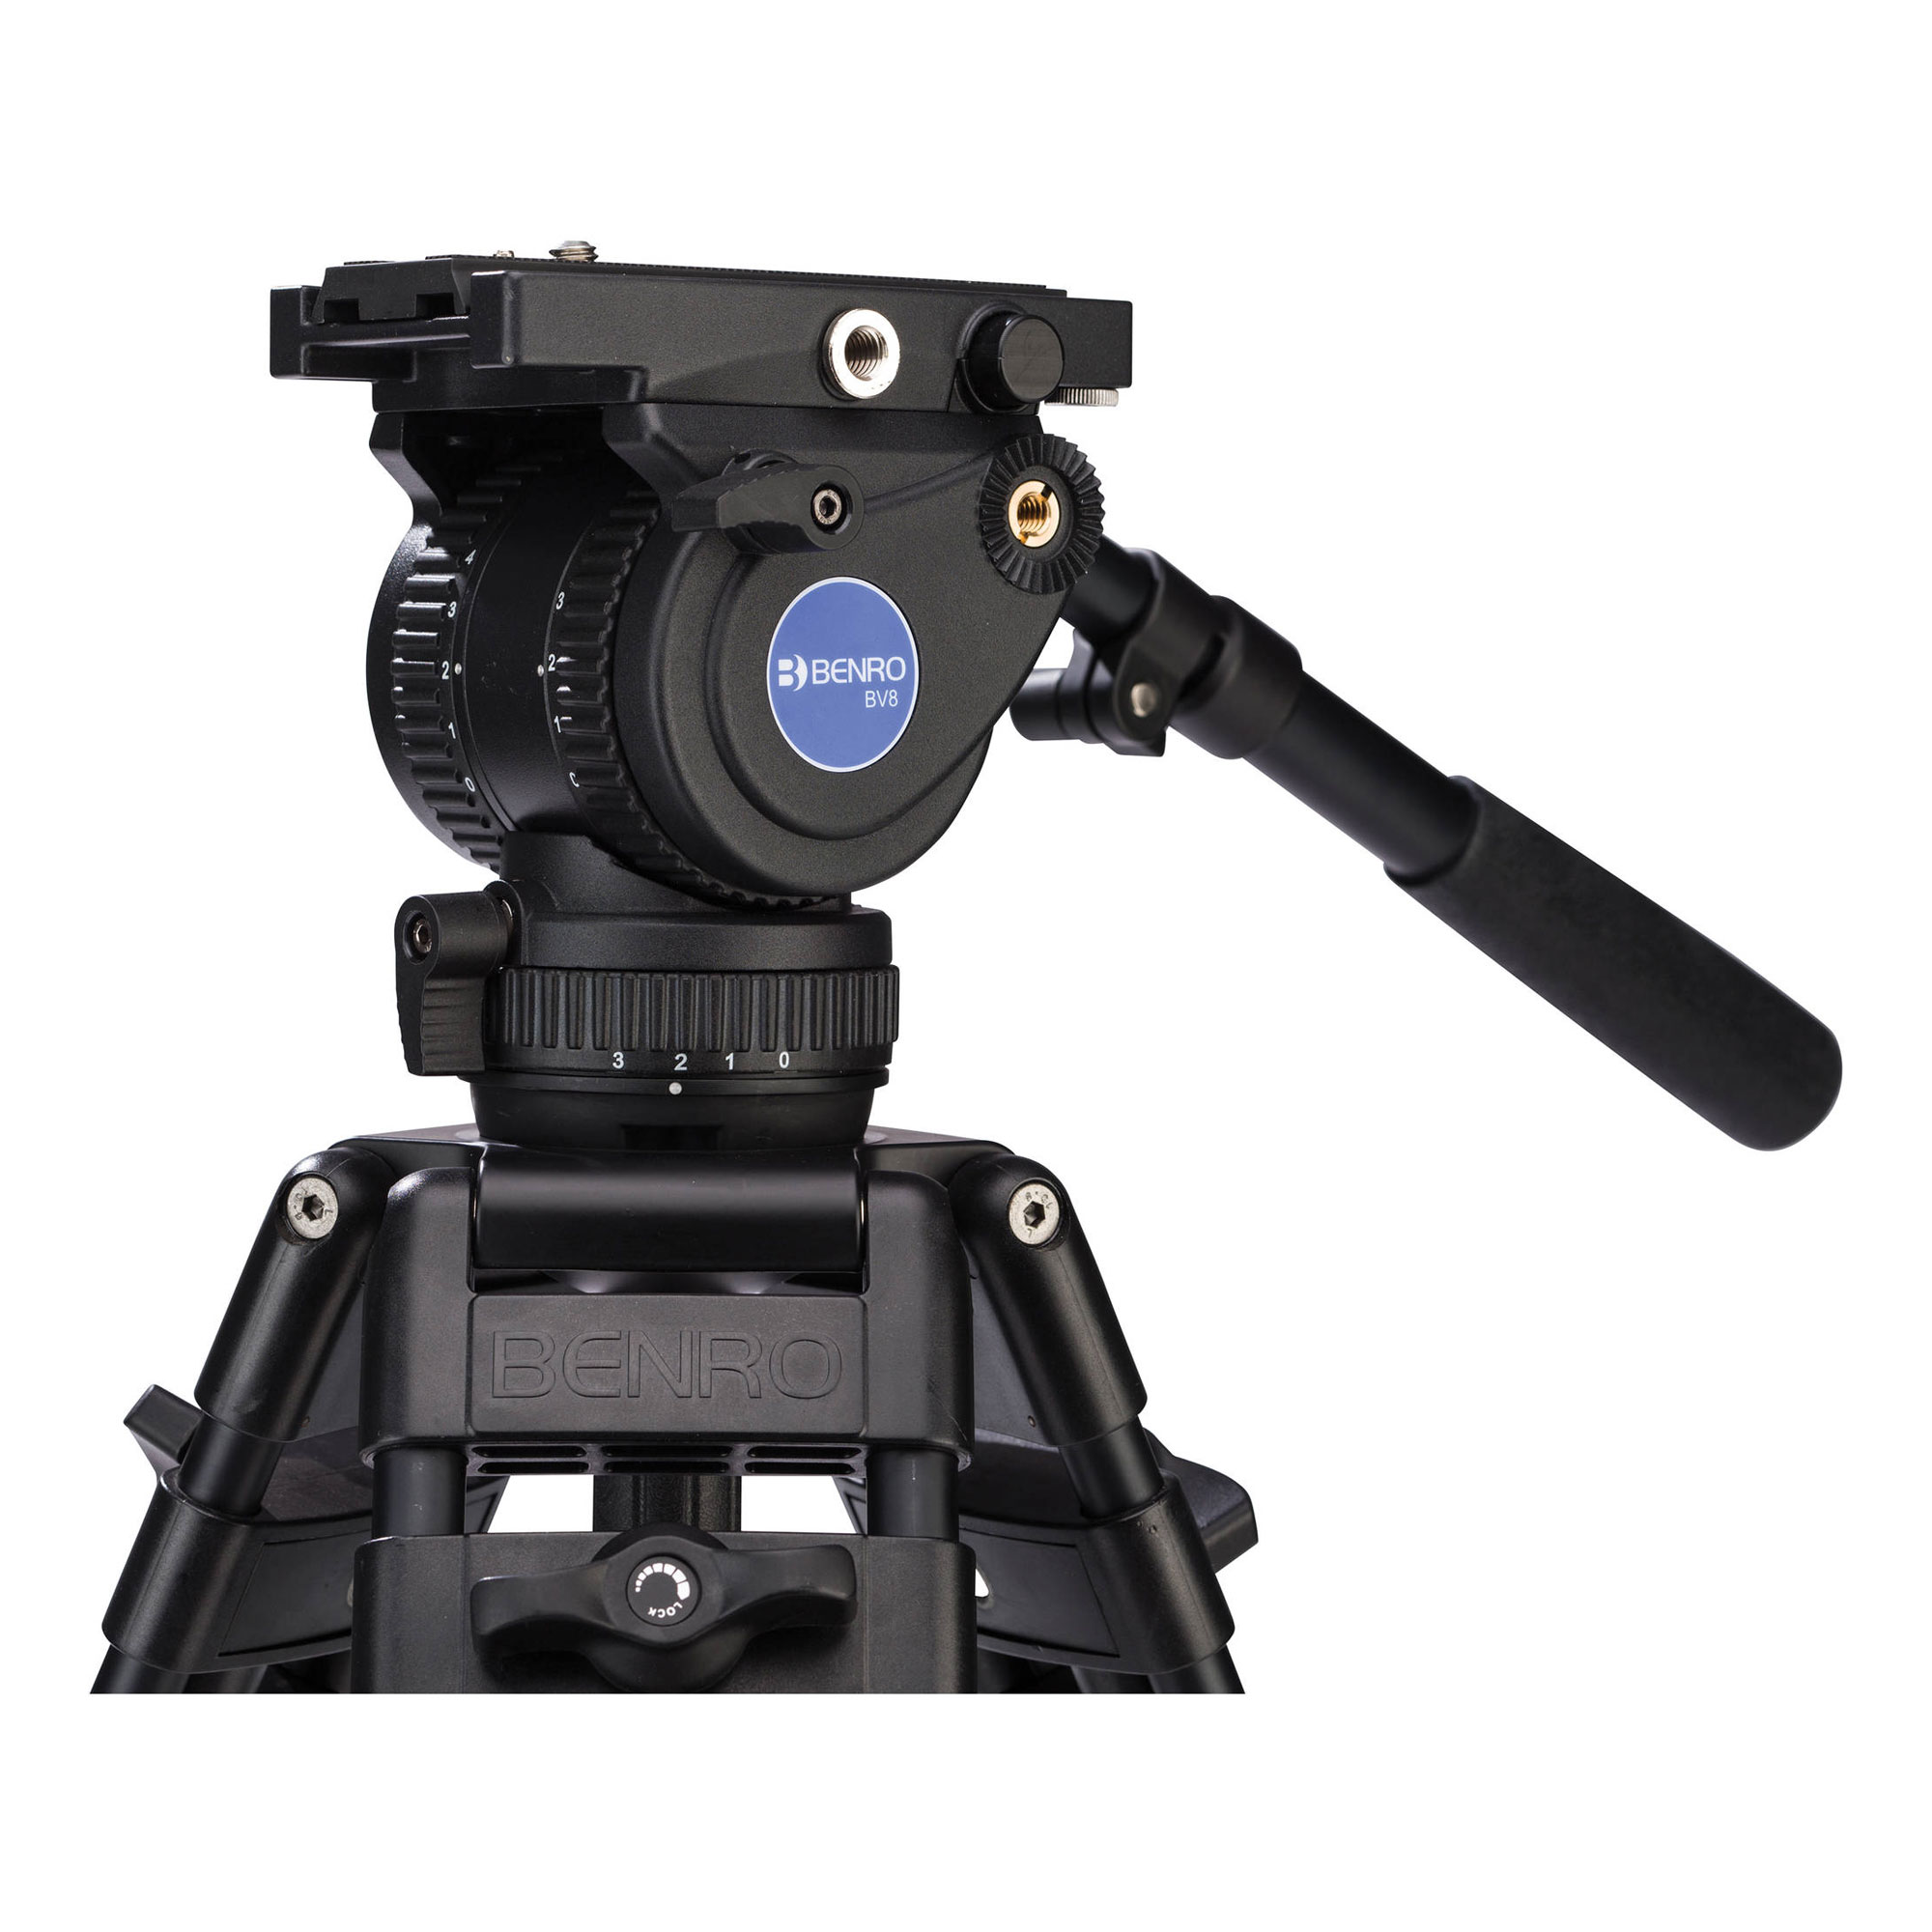 EAN 6931747300075 product image for BV8H 75mm Video Head | upcitemdb.com